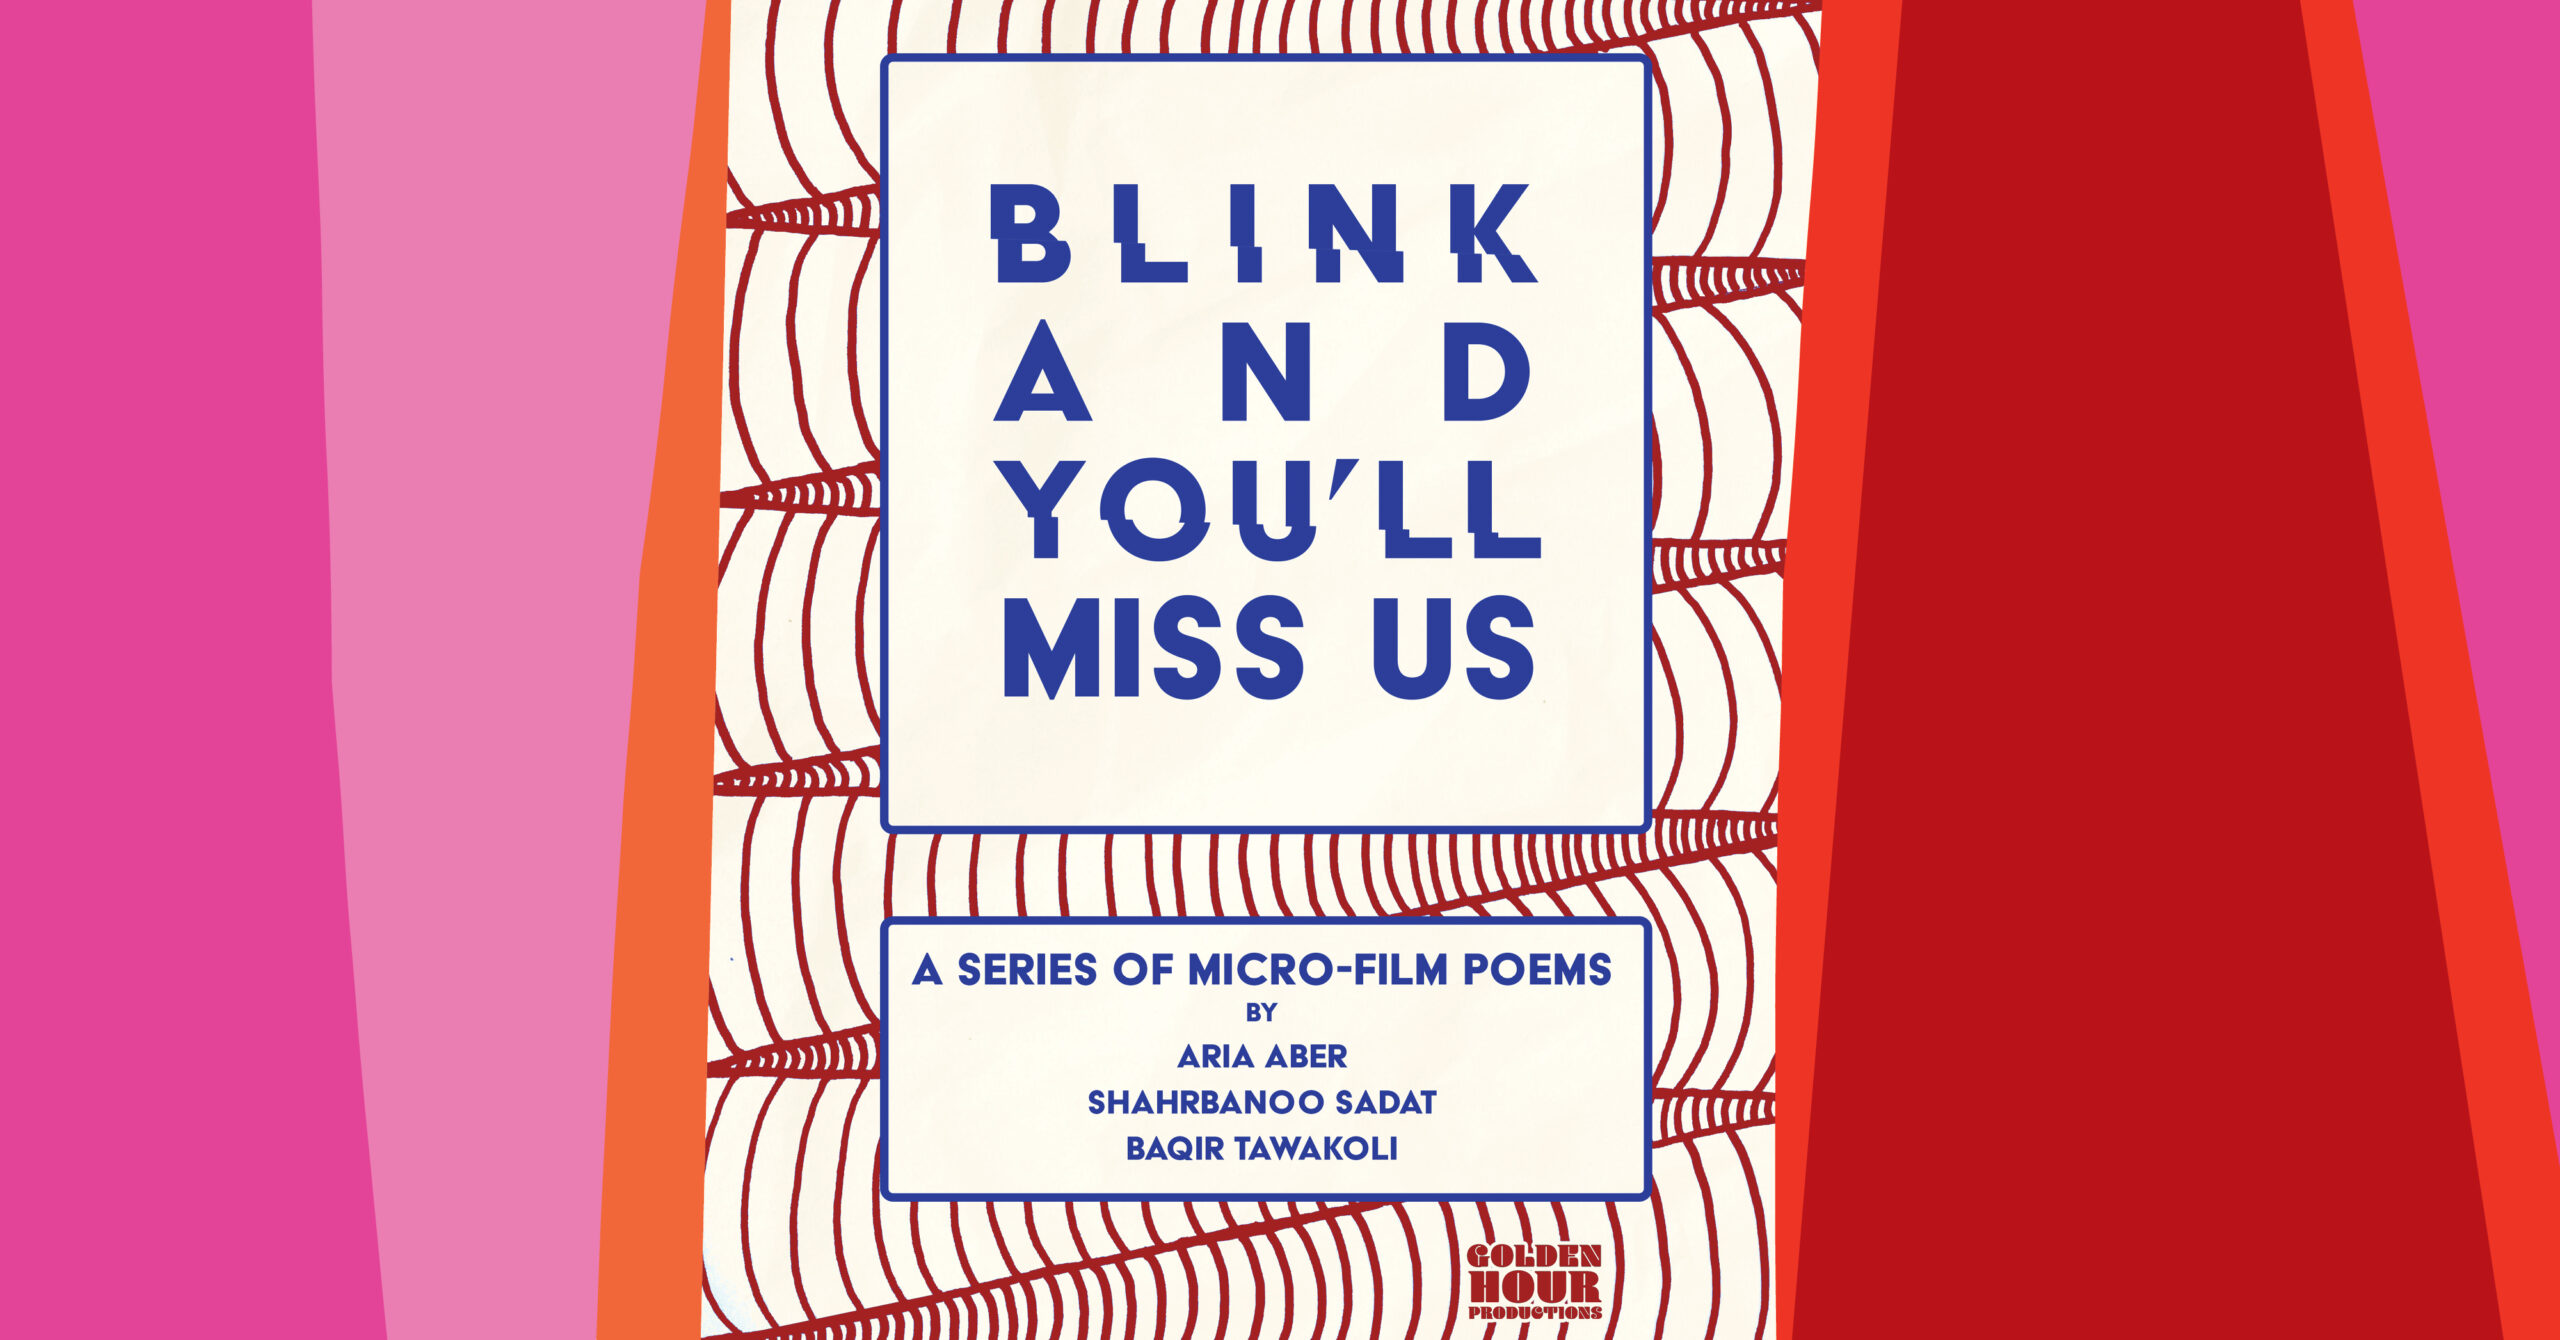 Blink and You'll Miss Us